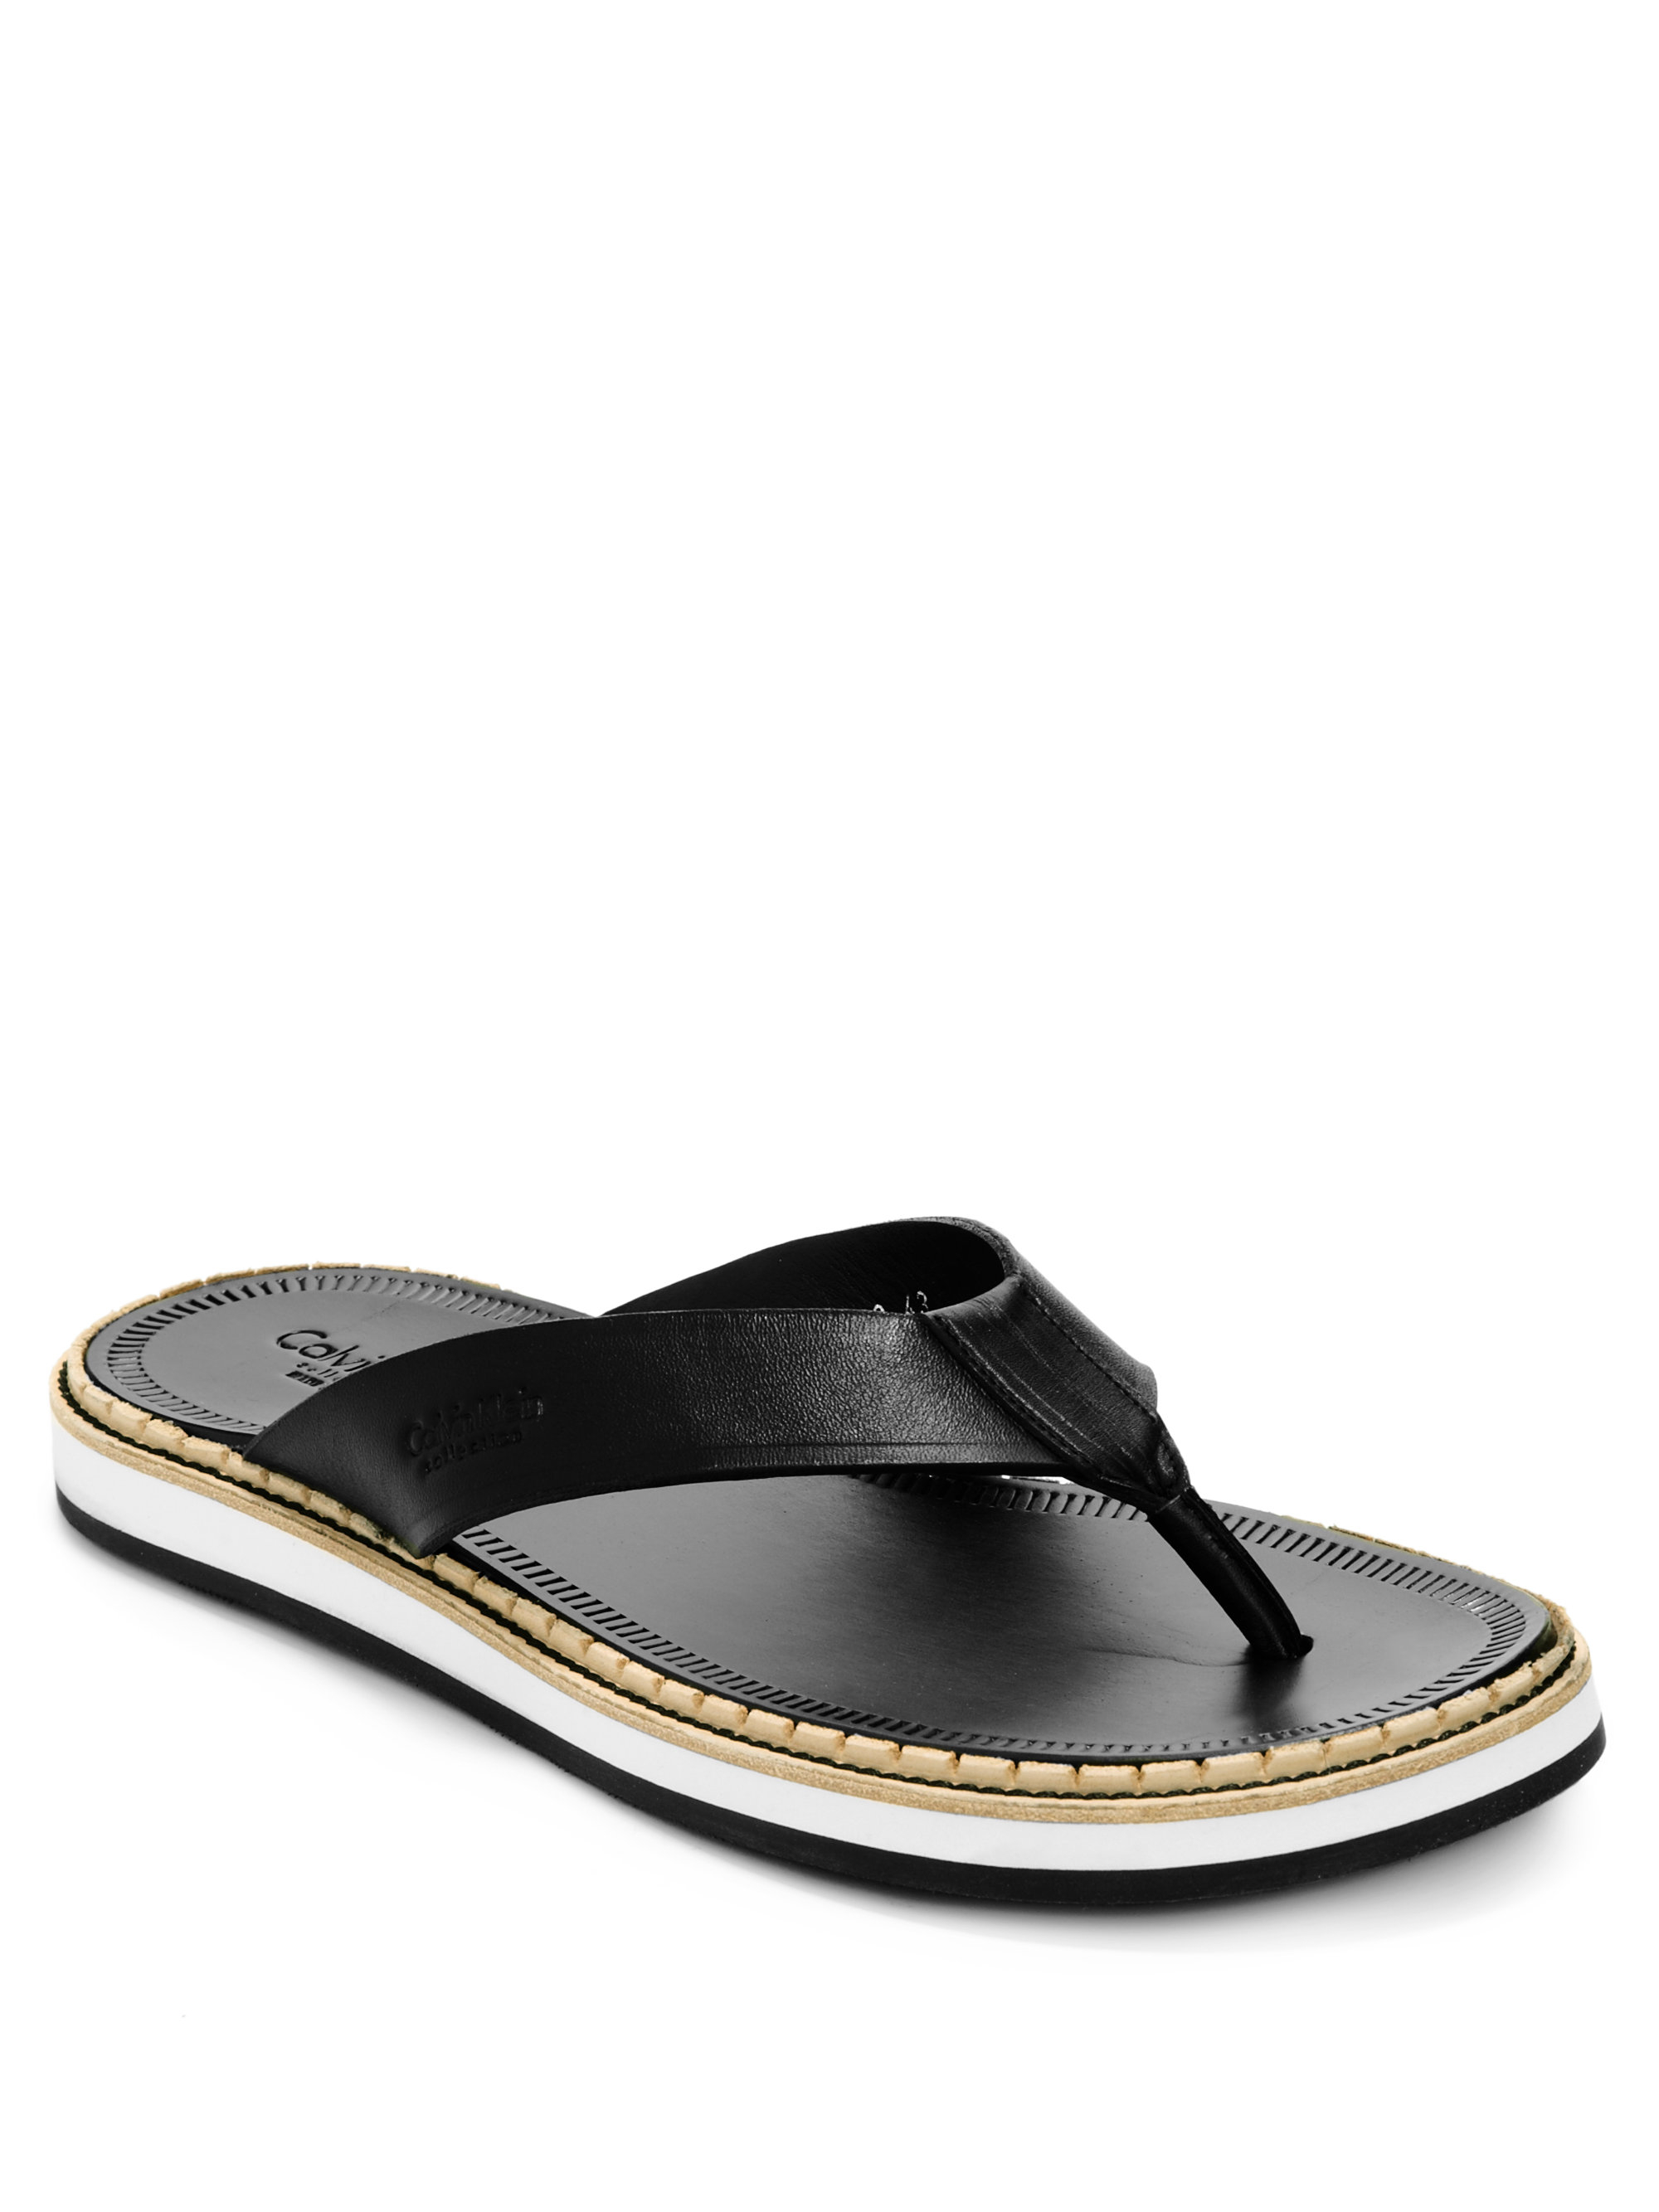 Calvin Klein Leather Thong Sandals in Black for Men | Lyst